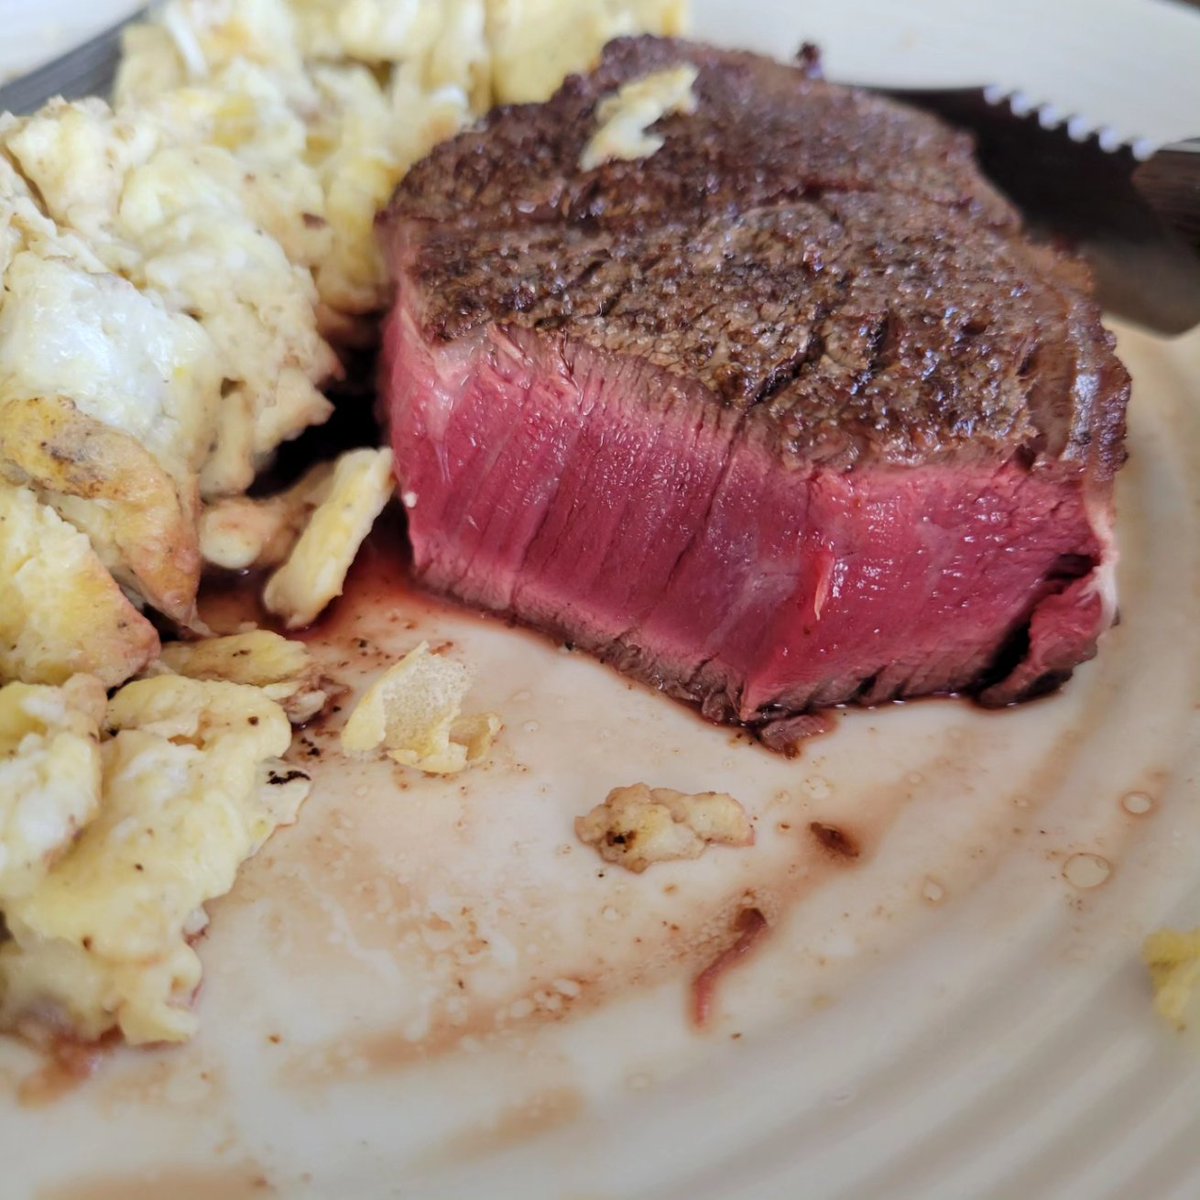 Overdid it on the eggs, but my body was craving them!

7oz Filet Mignon seared in butter.
1 cup egg whites, 3 whole eggs, 1oz fresh mozzarella.

#thecarnivorern #carnivore #carnivorediet #keto #healthcoach #naturalweightloss
#womenwholift #fitnurse #weightlossjourney #weightloss…